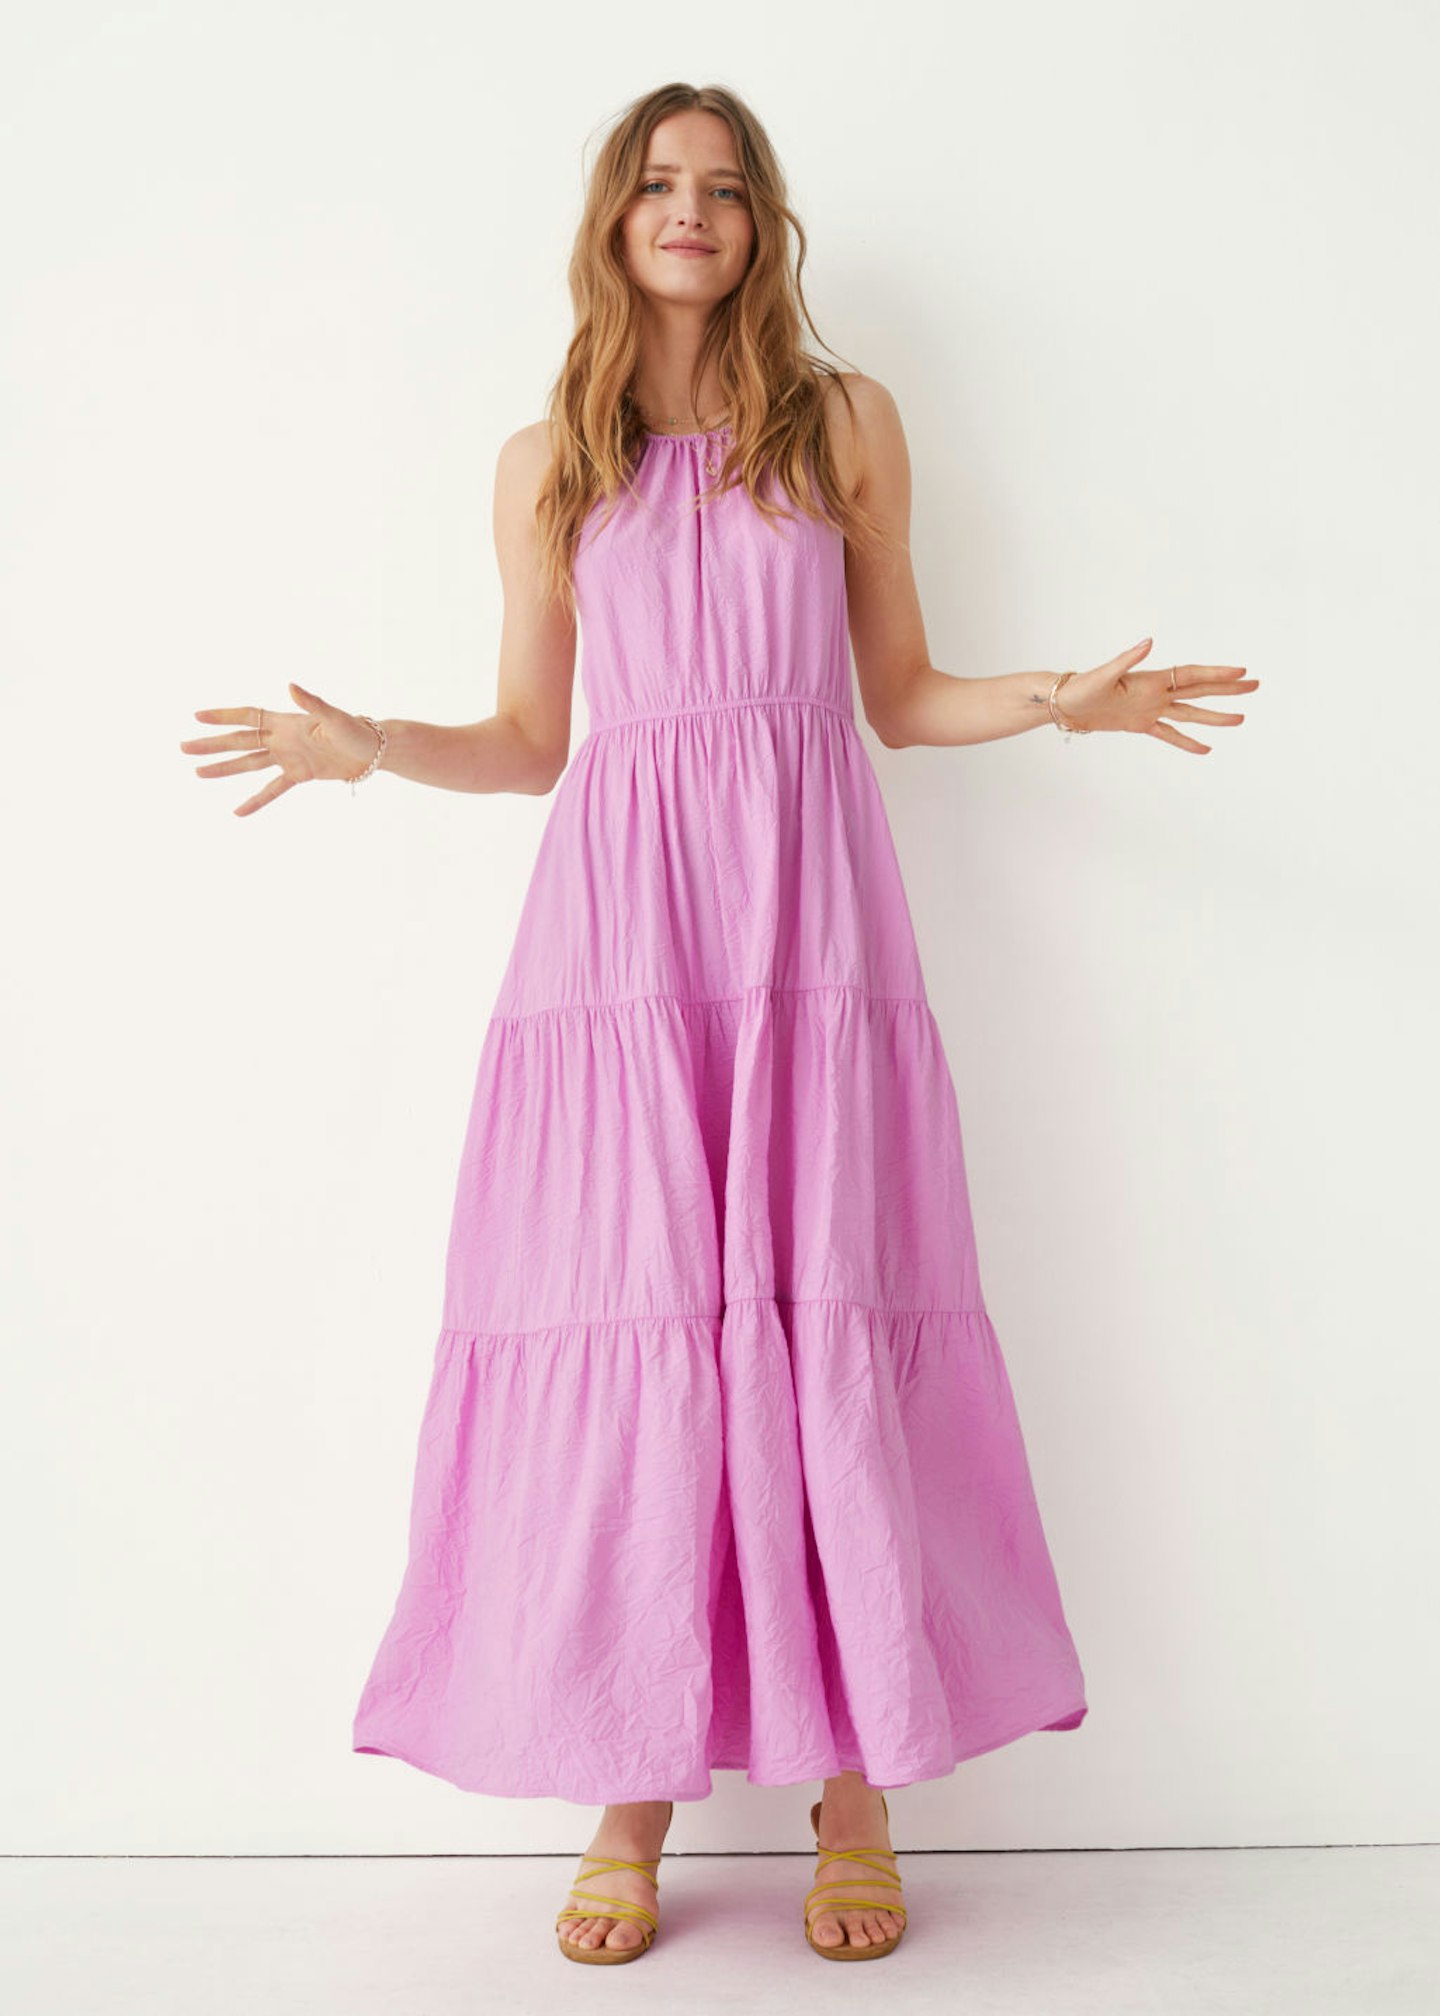 jubilee weekend &Other Stories, Strappy Tiered Maxi Dress, £110